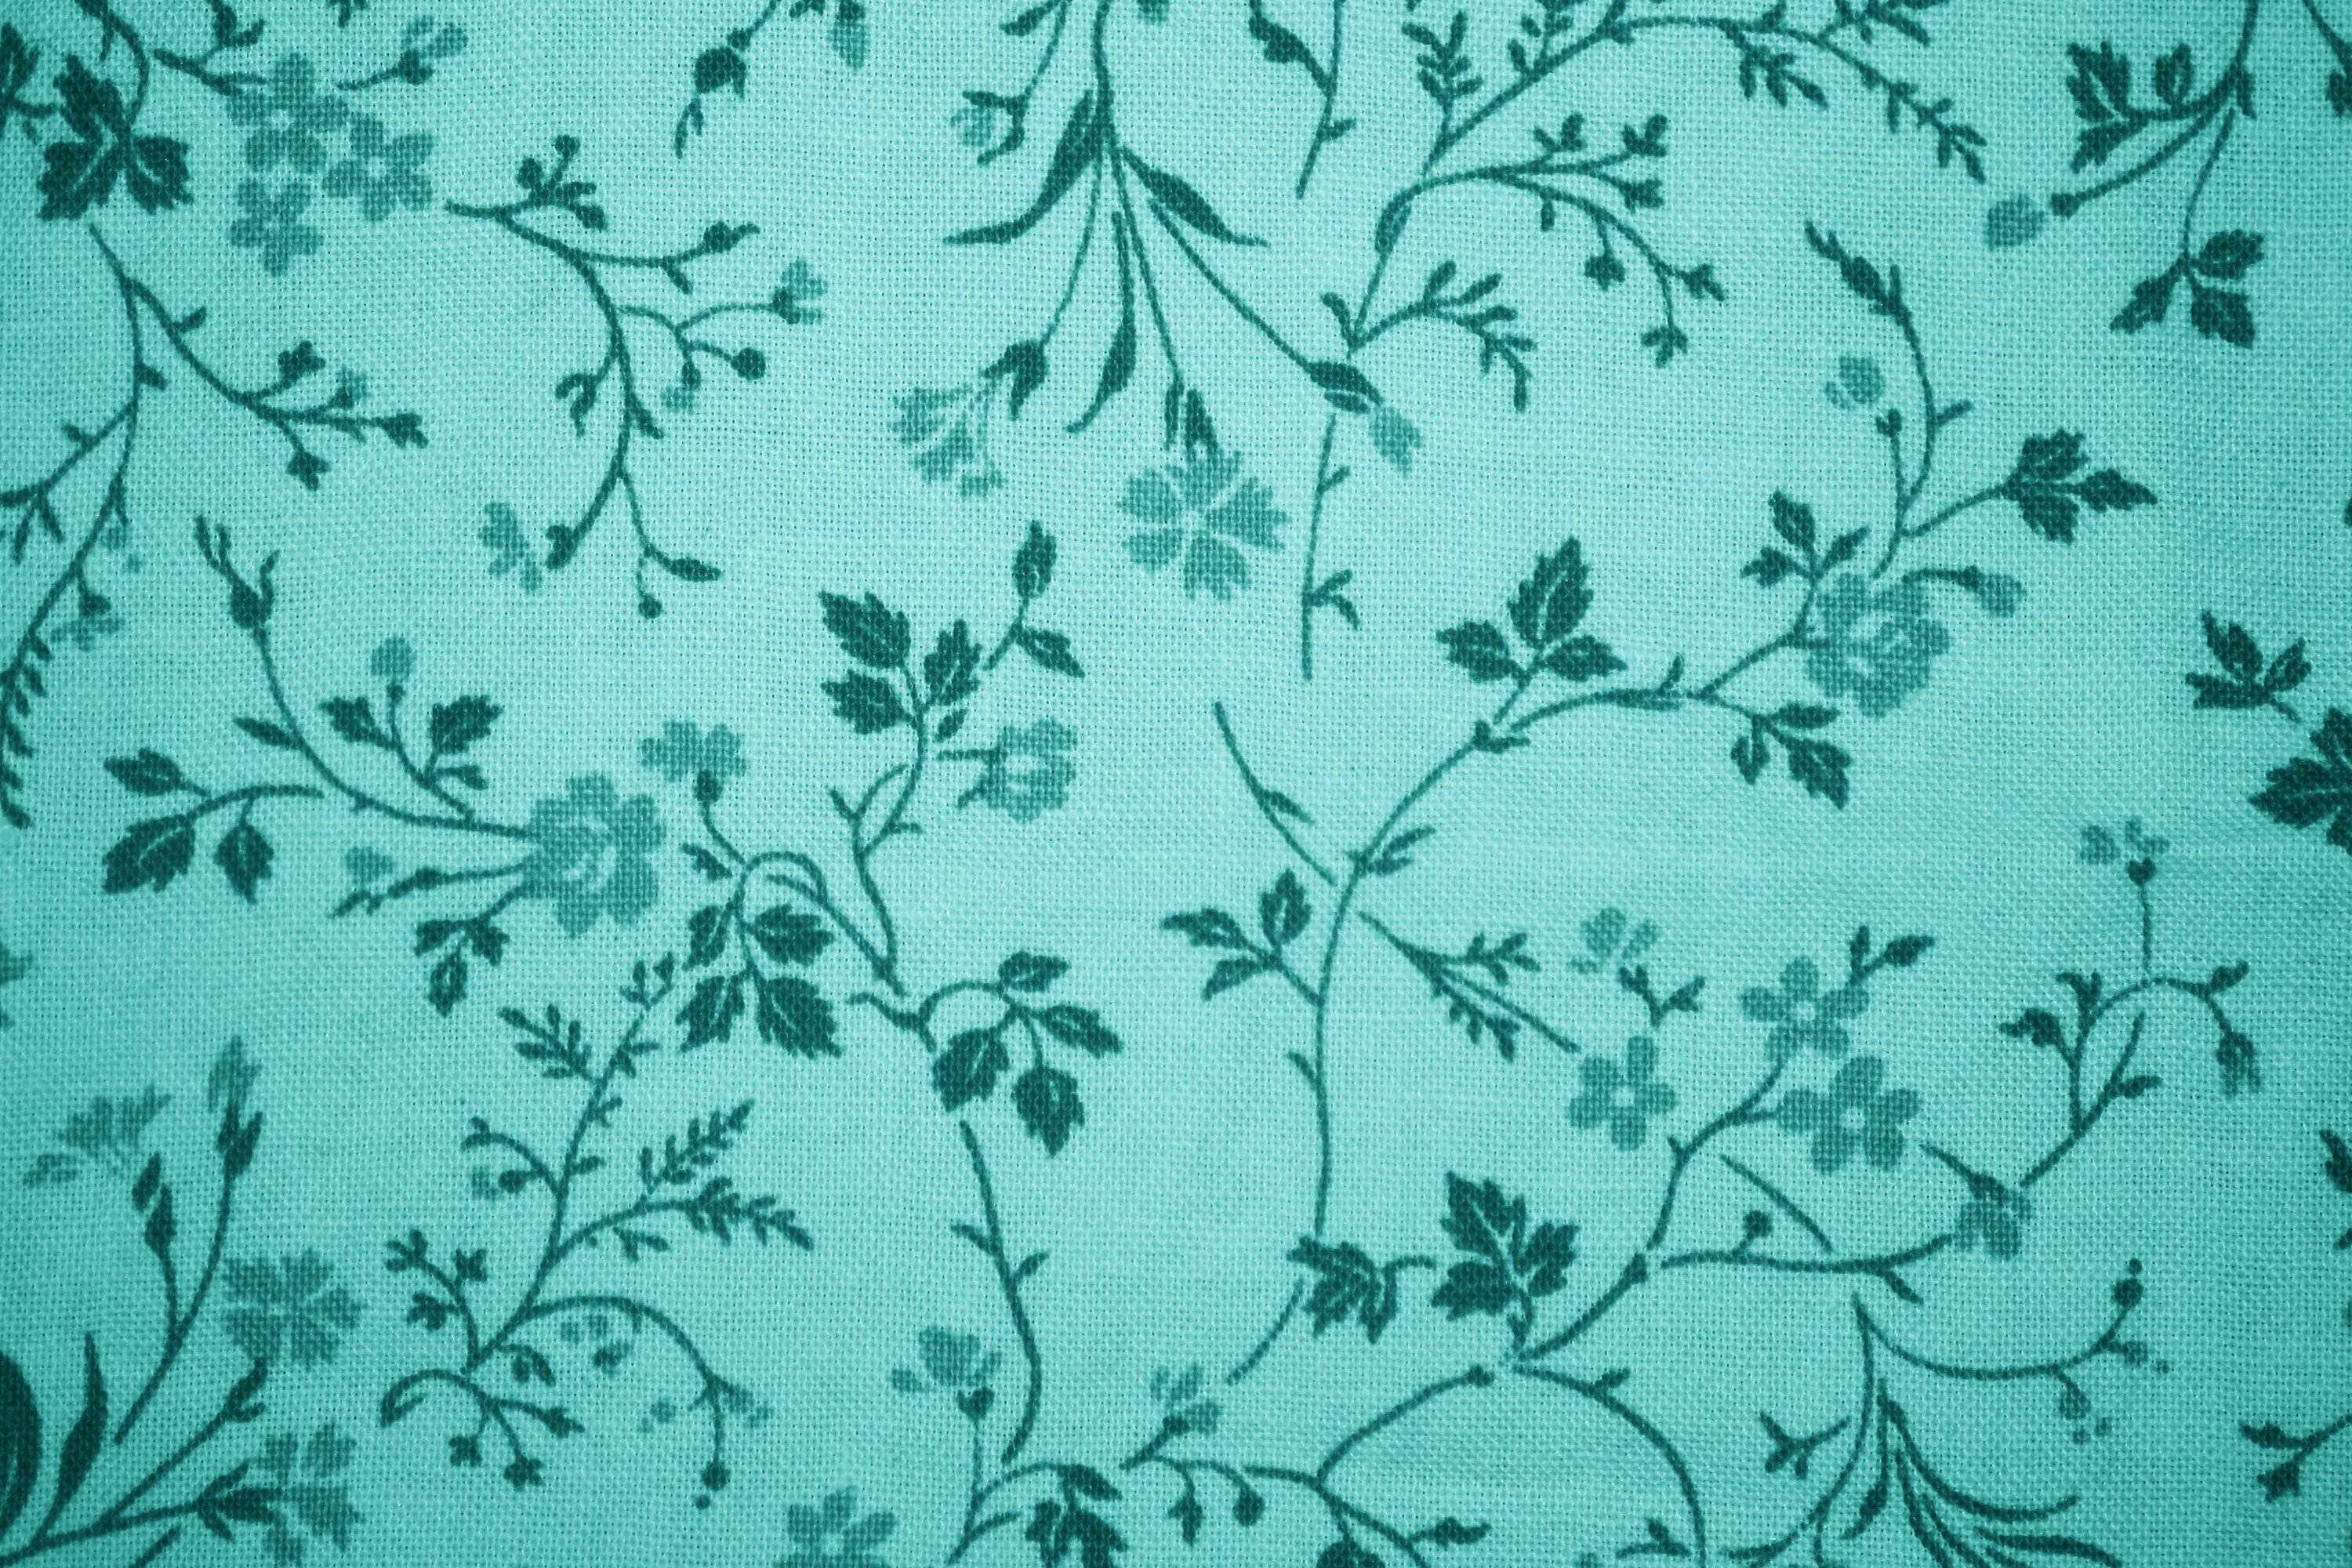 Teal Floral Print Fabric Texture Picture Free Photograph